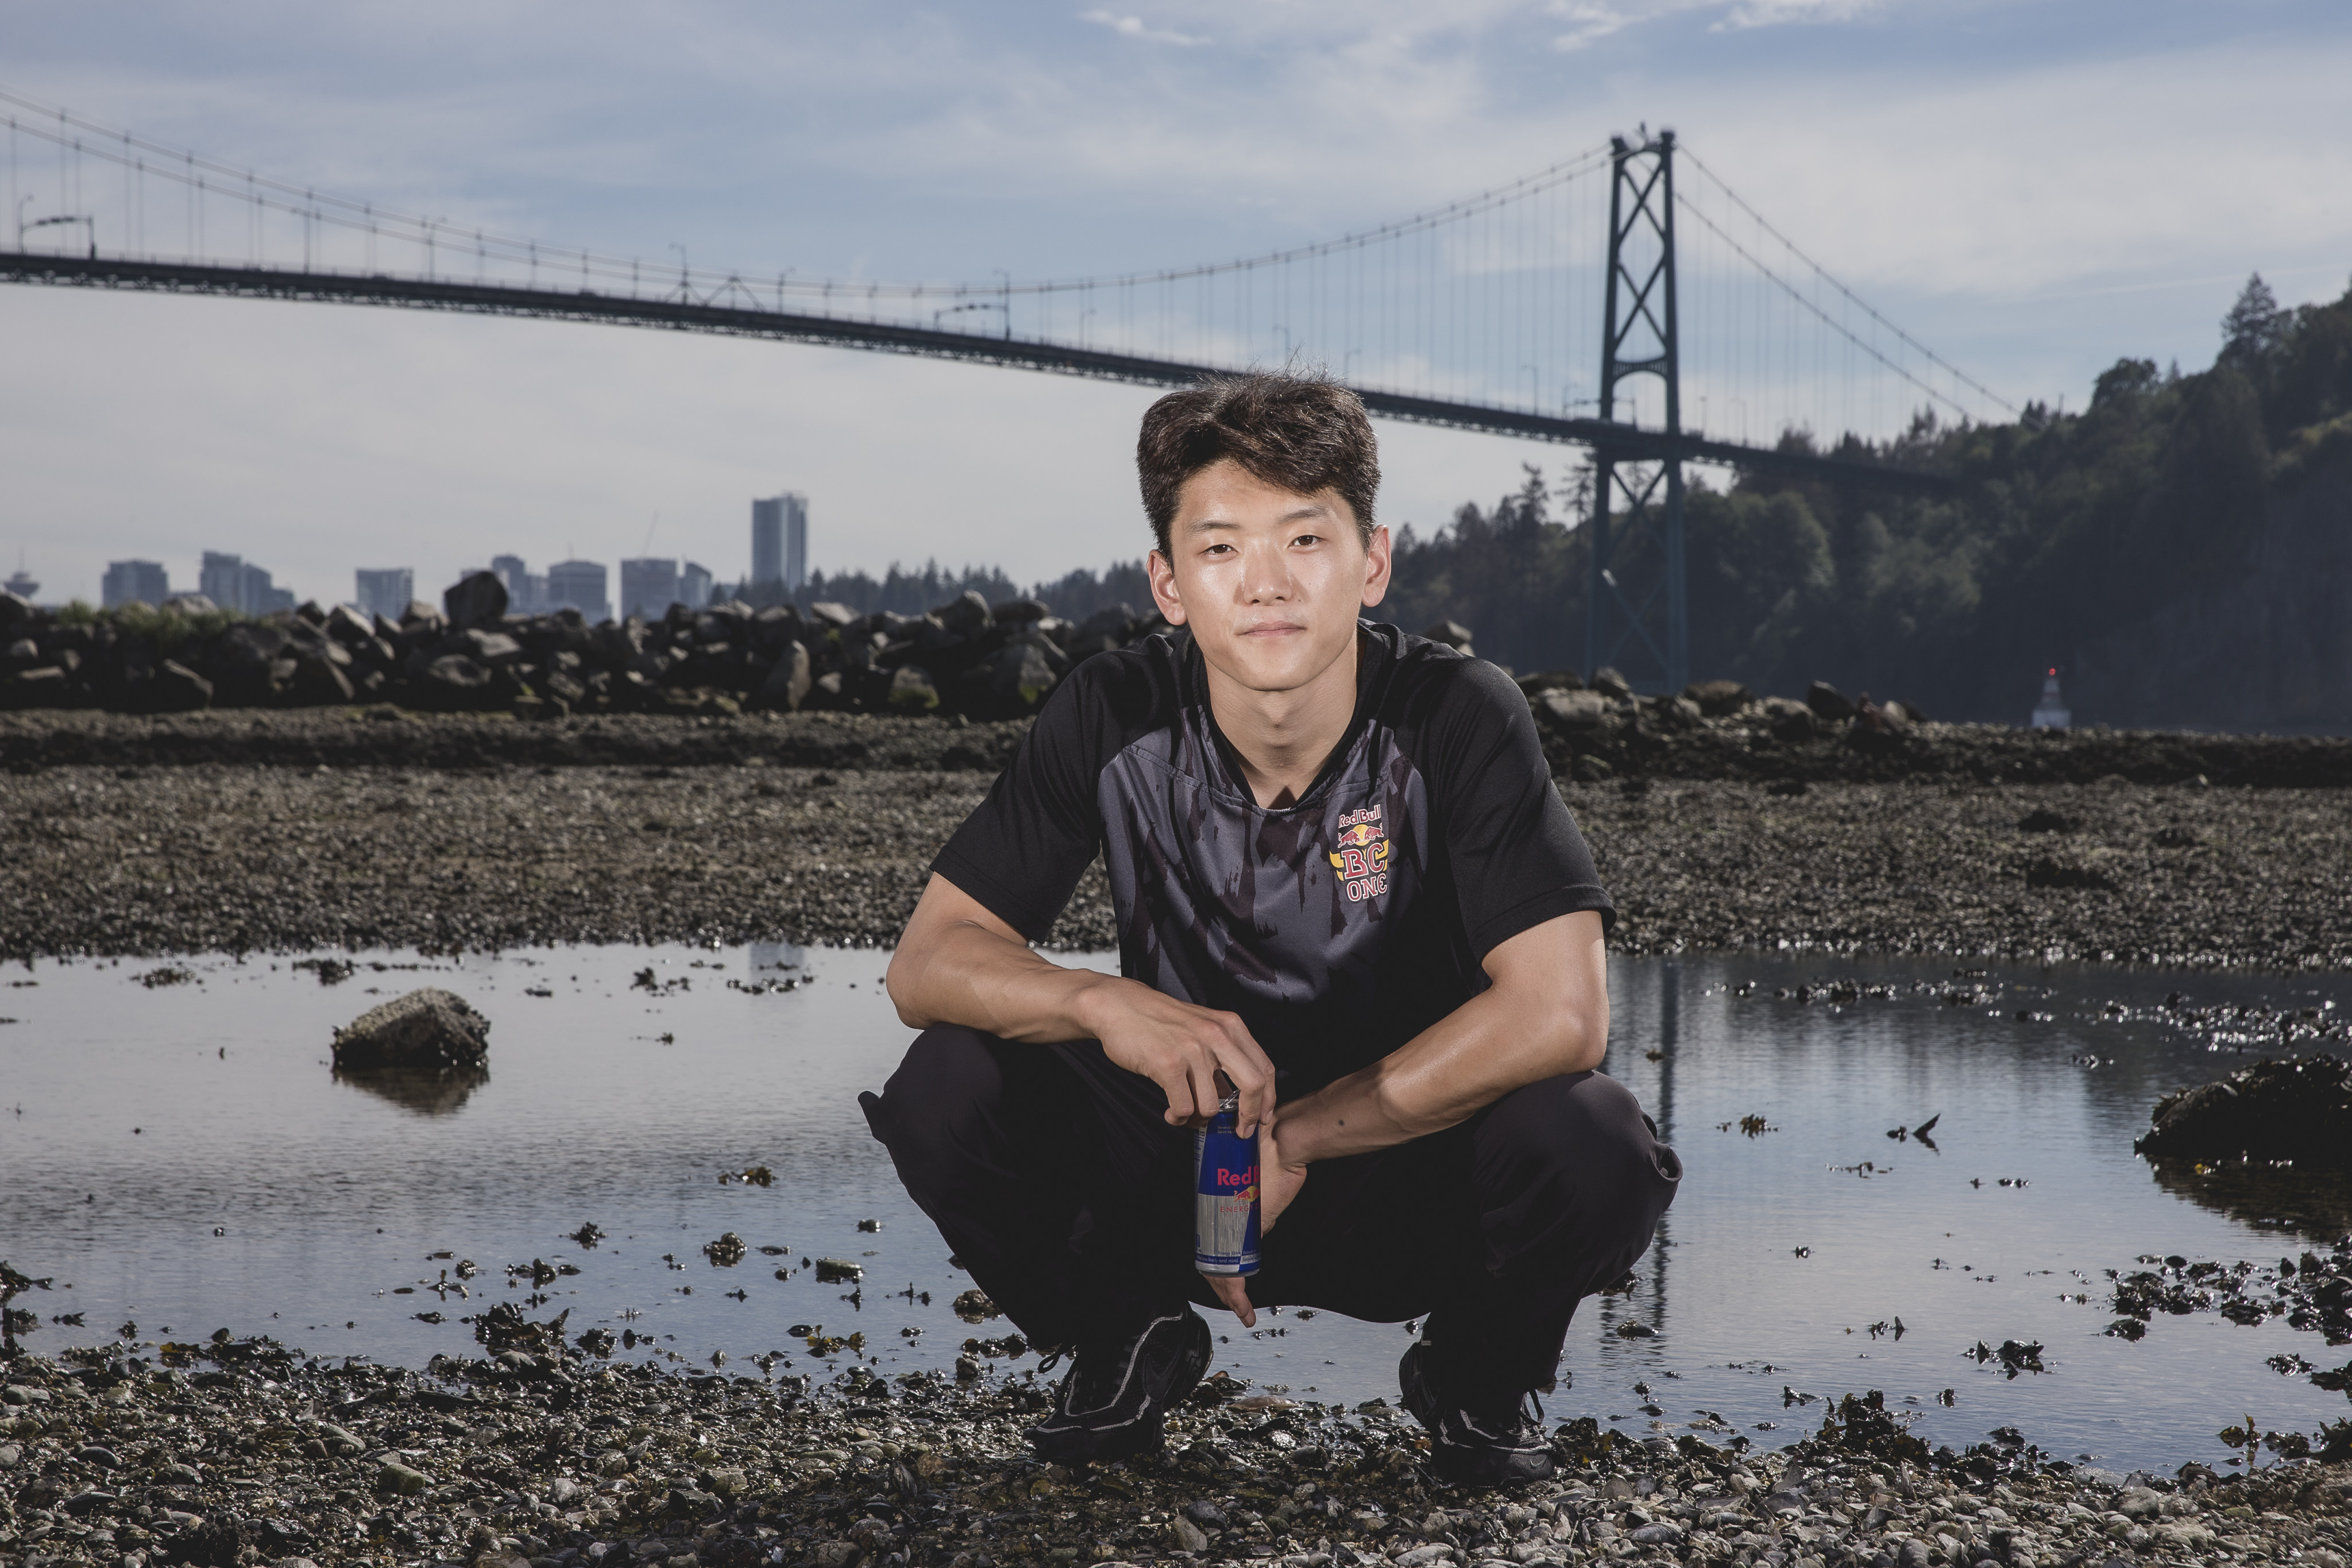 Red Bull athlete Phil Kim, also known as B-Boy Phil Wizard, poses for a picture in Vancouver. Photo: Red Bull